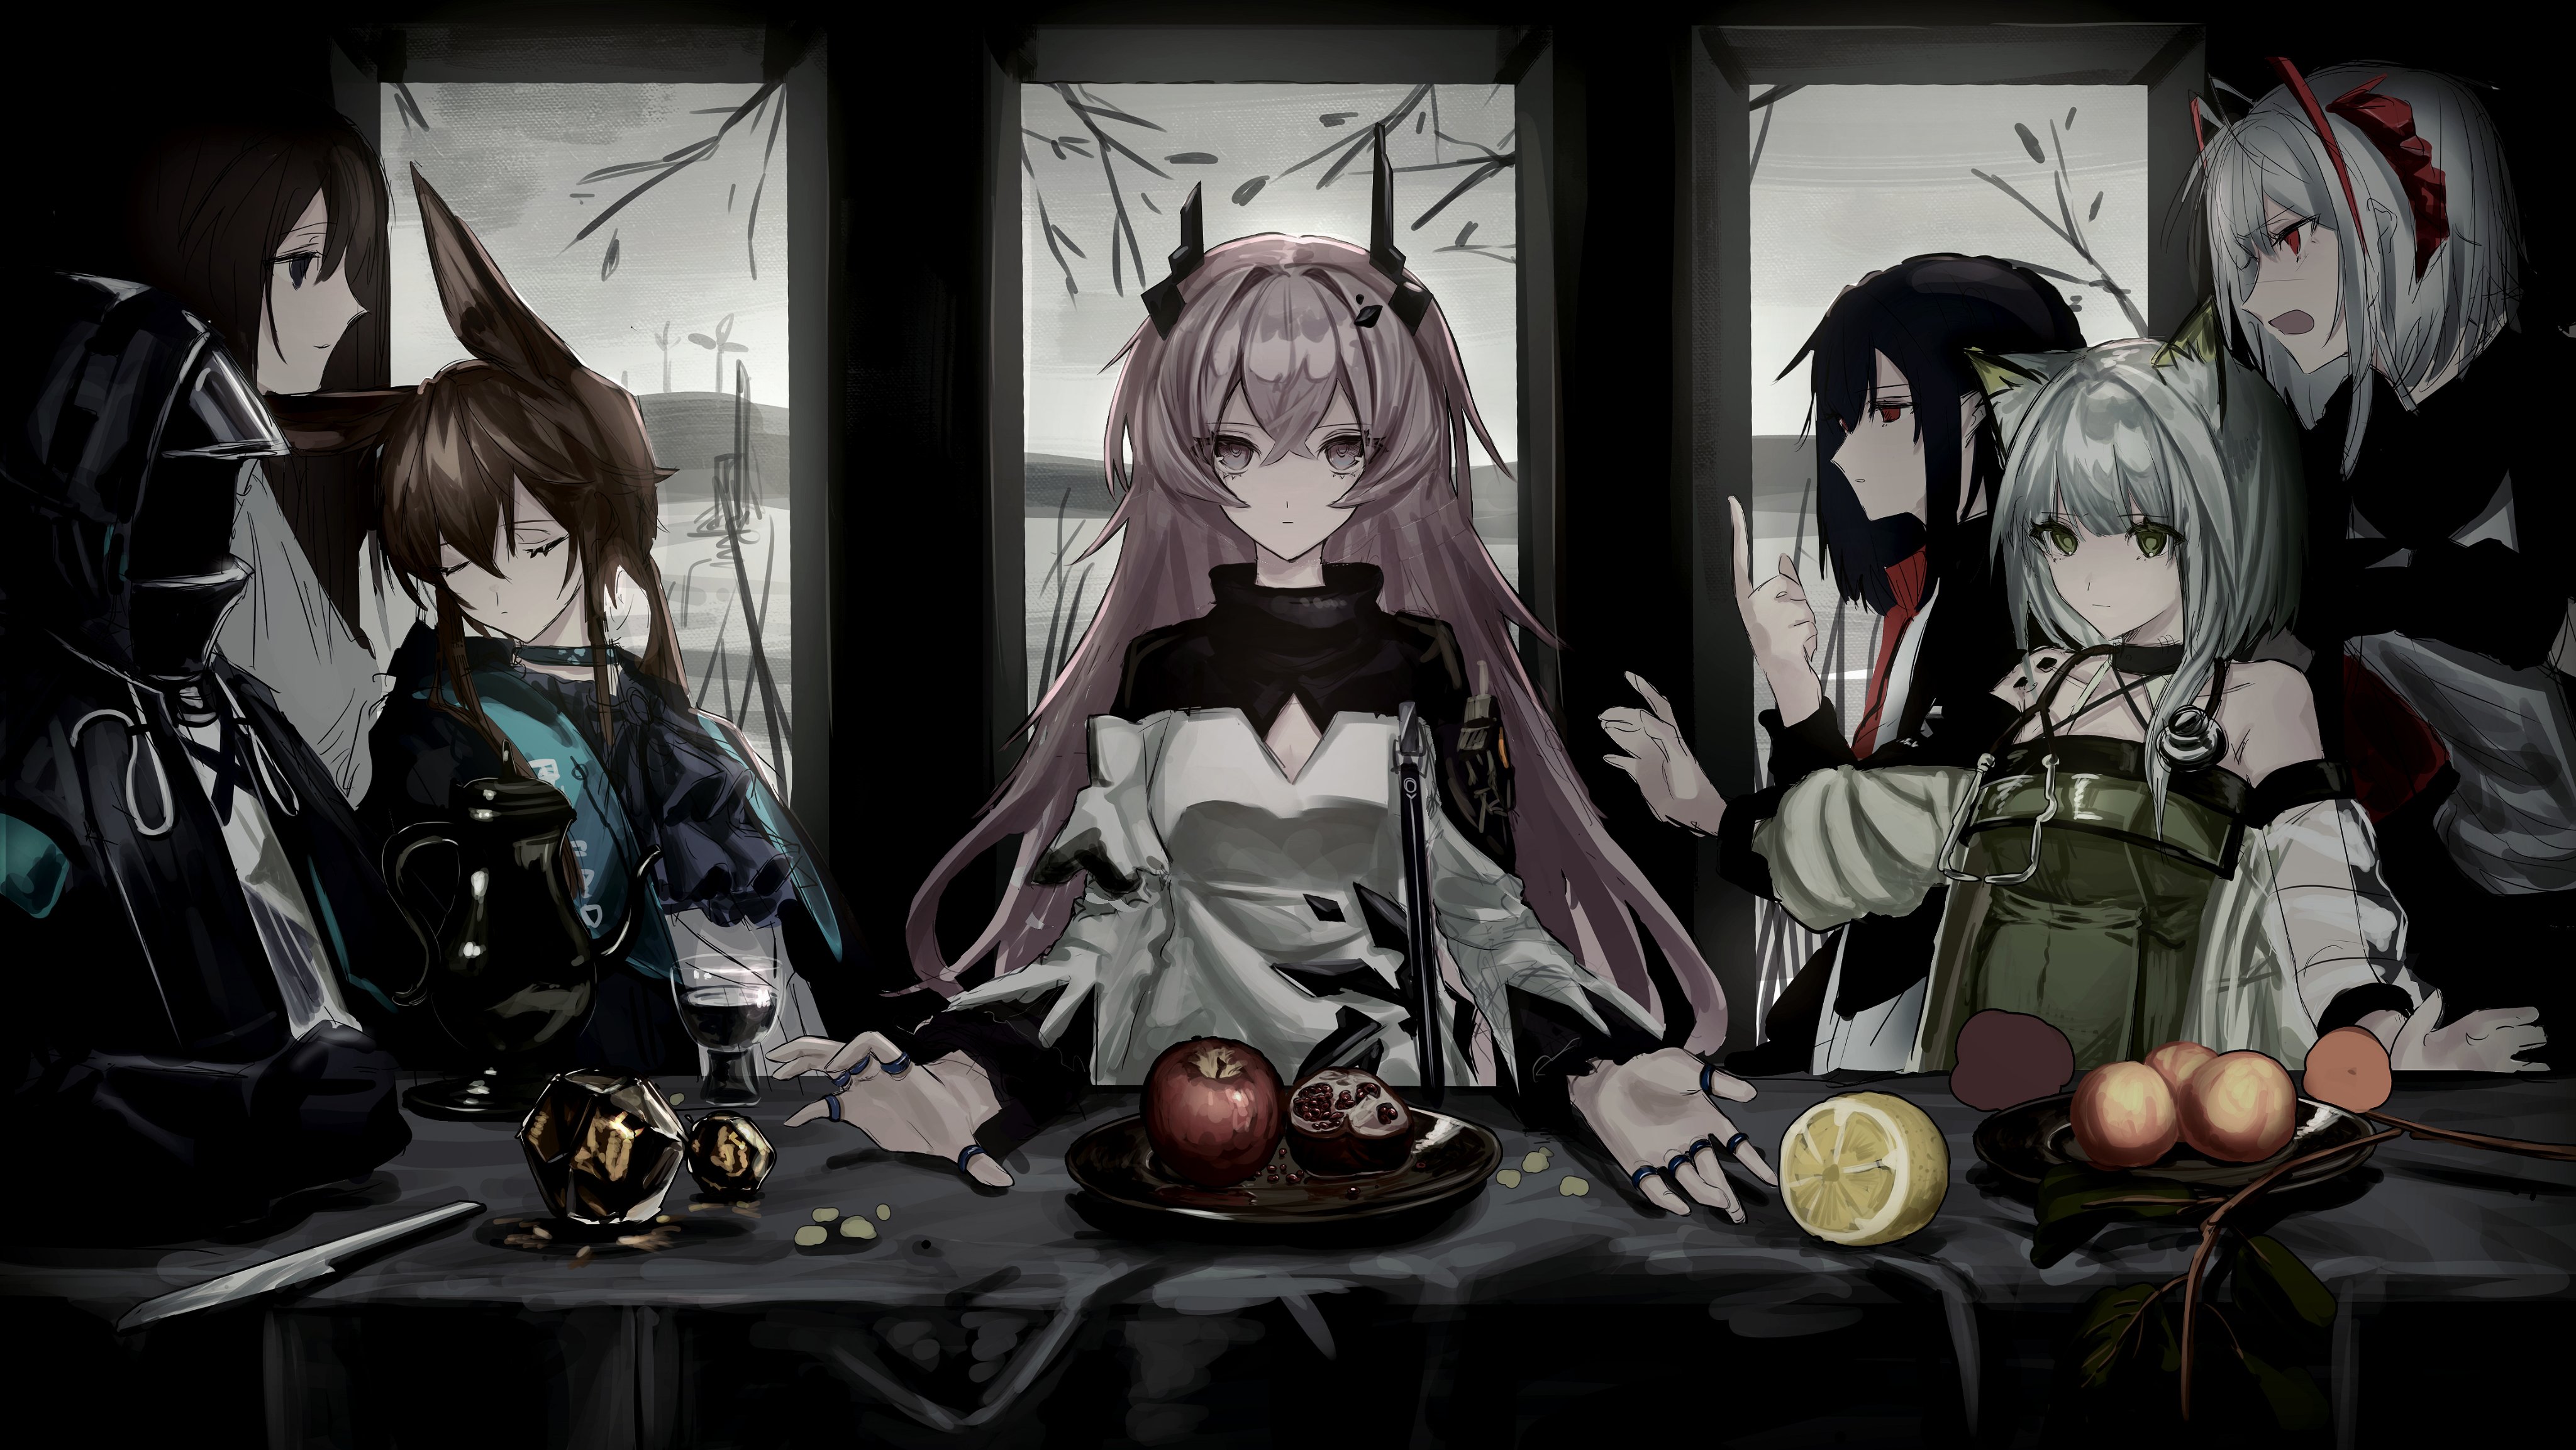 Anime 4096x2305 Arknights anime girls The Last Supper Doctor(Arknights) Amiya (Arknights) Kal'tsit (Arknights) W (Arknights) Theresa(Arknights) Priestess (Arknights) Closure(Arknights) standing fruit long hair closed eyes